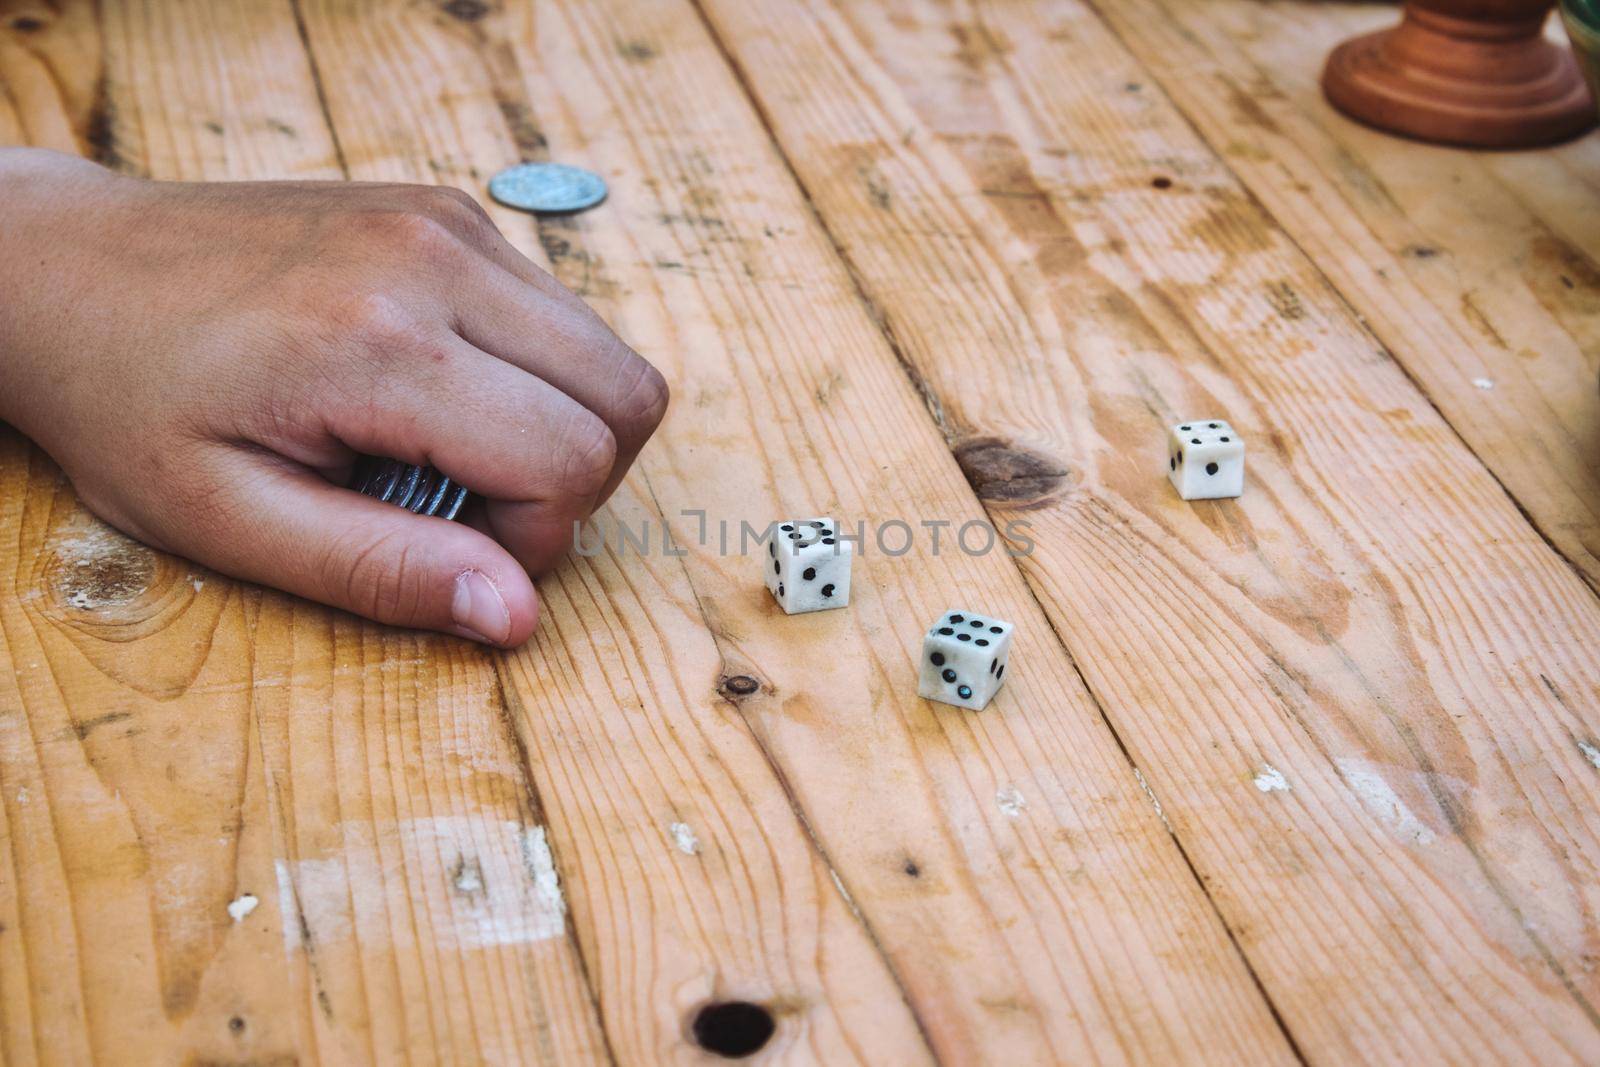 Gambling whilst playing a game with dice on a wooden table by tennesseewitney